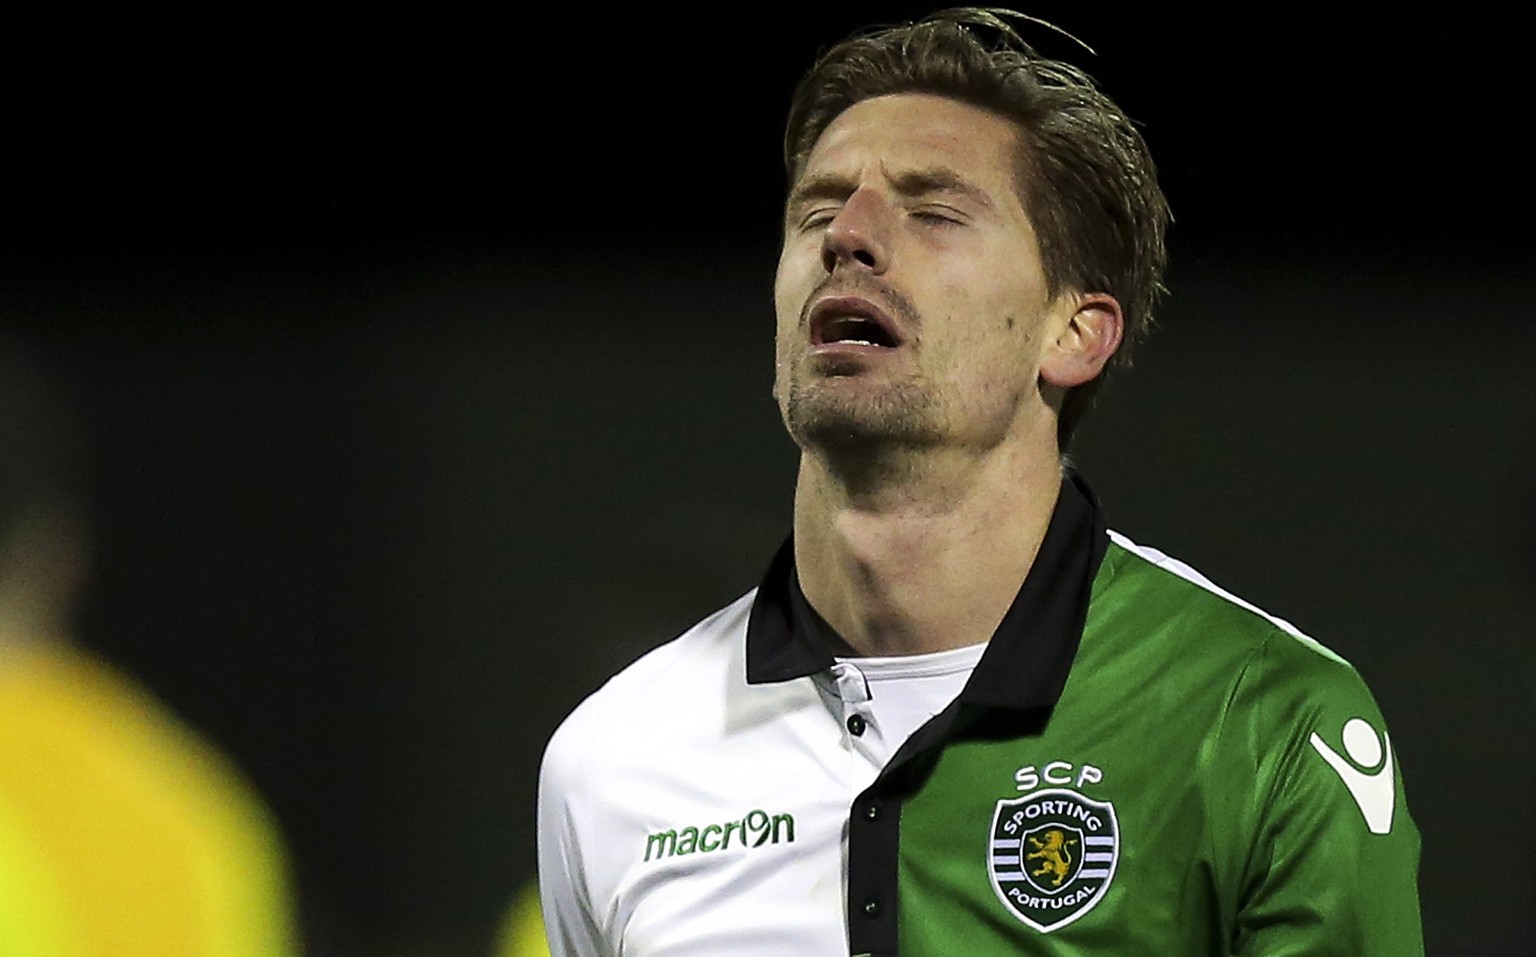 epa05725741 Sporting Adrien Silva reacts after losing their Portuguese Cup soccer match held at Chaves Municipal stadium, Chaves, Portugal, 17 January 2017. EPA/JOSE COELHO